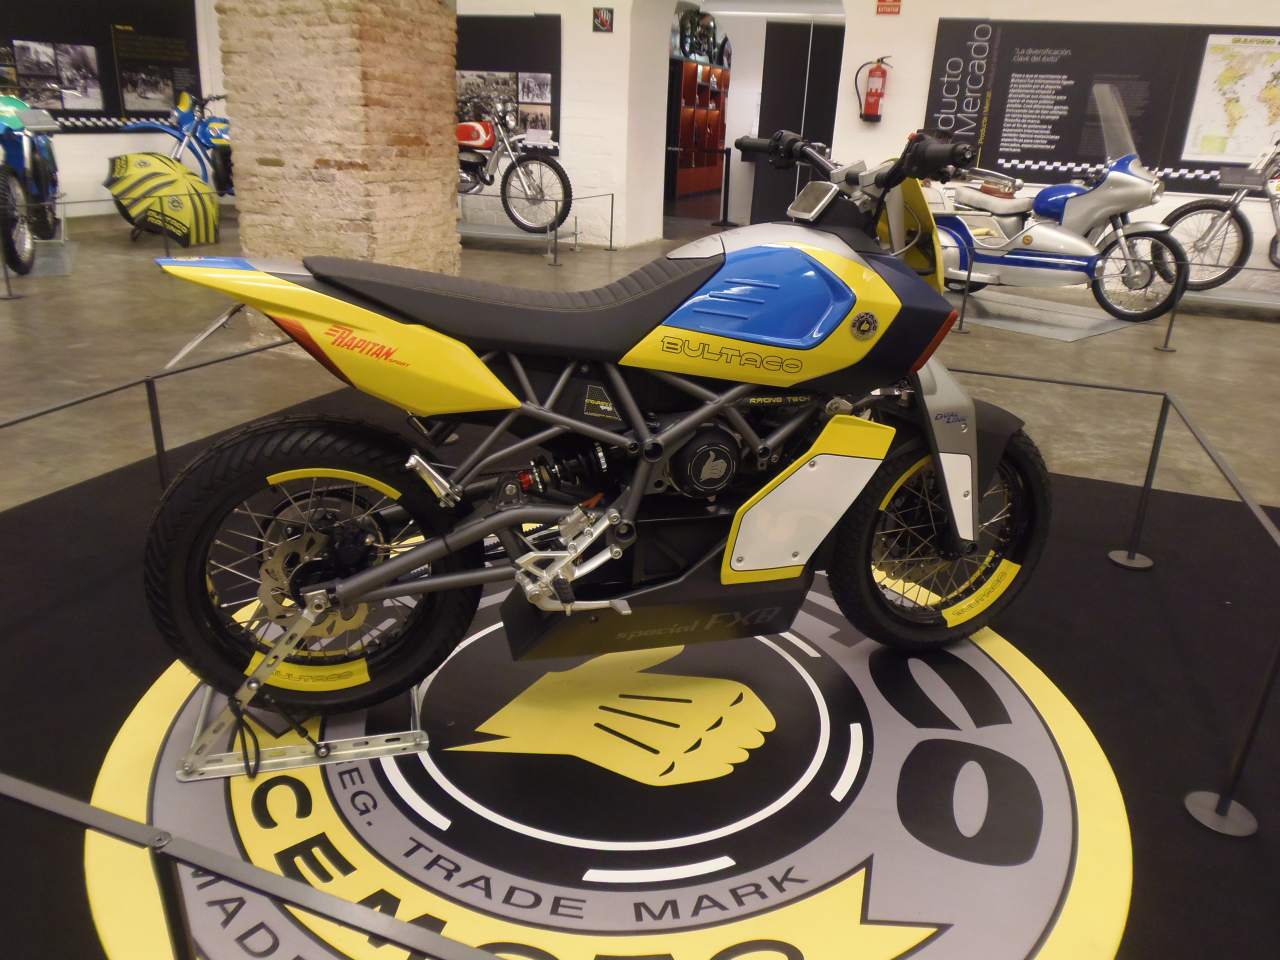 Bultaco Motorcycles Distributions Going to Open in Catalonia